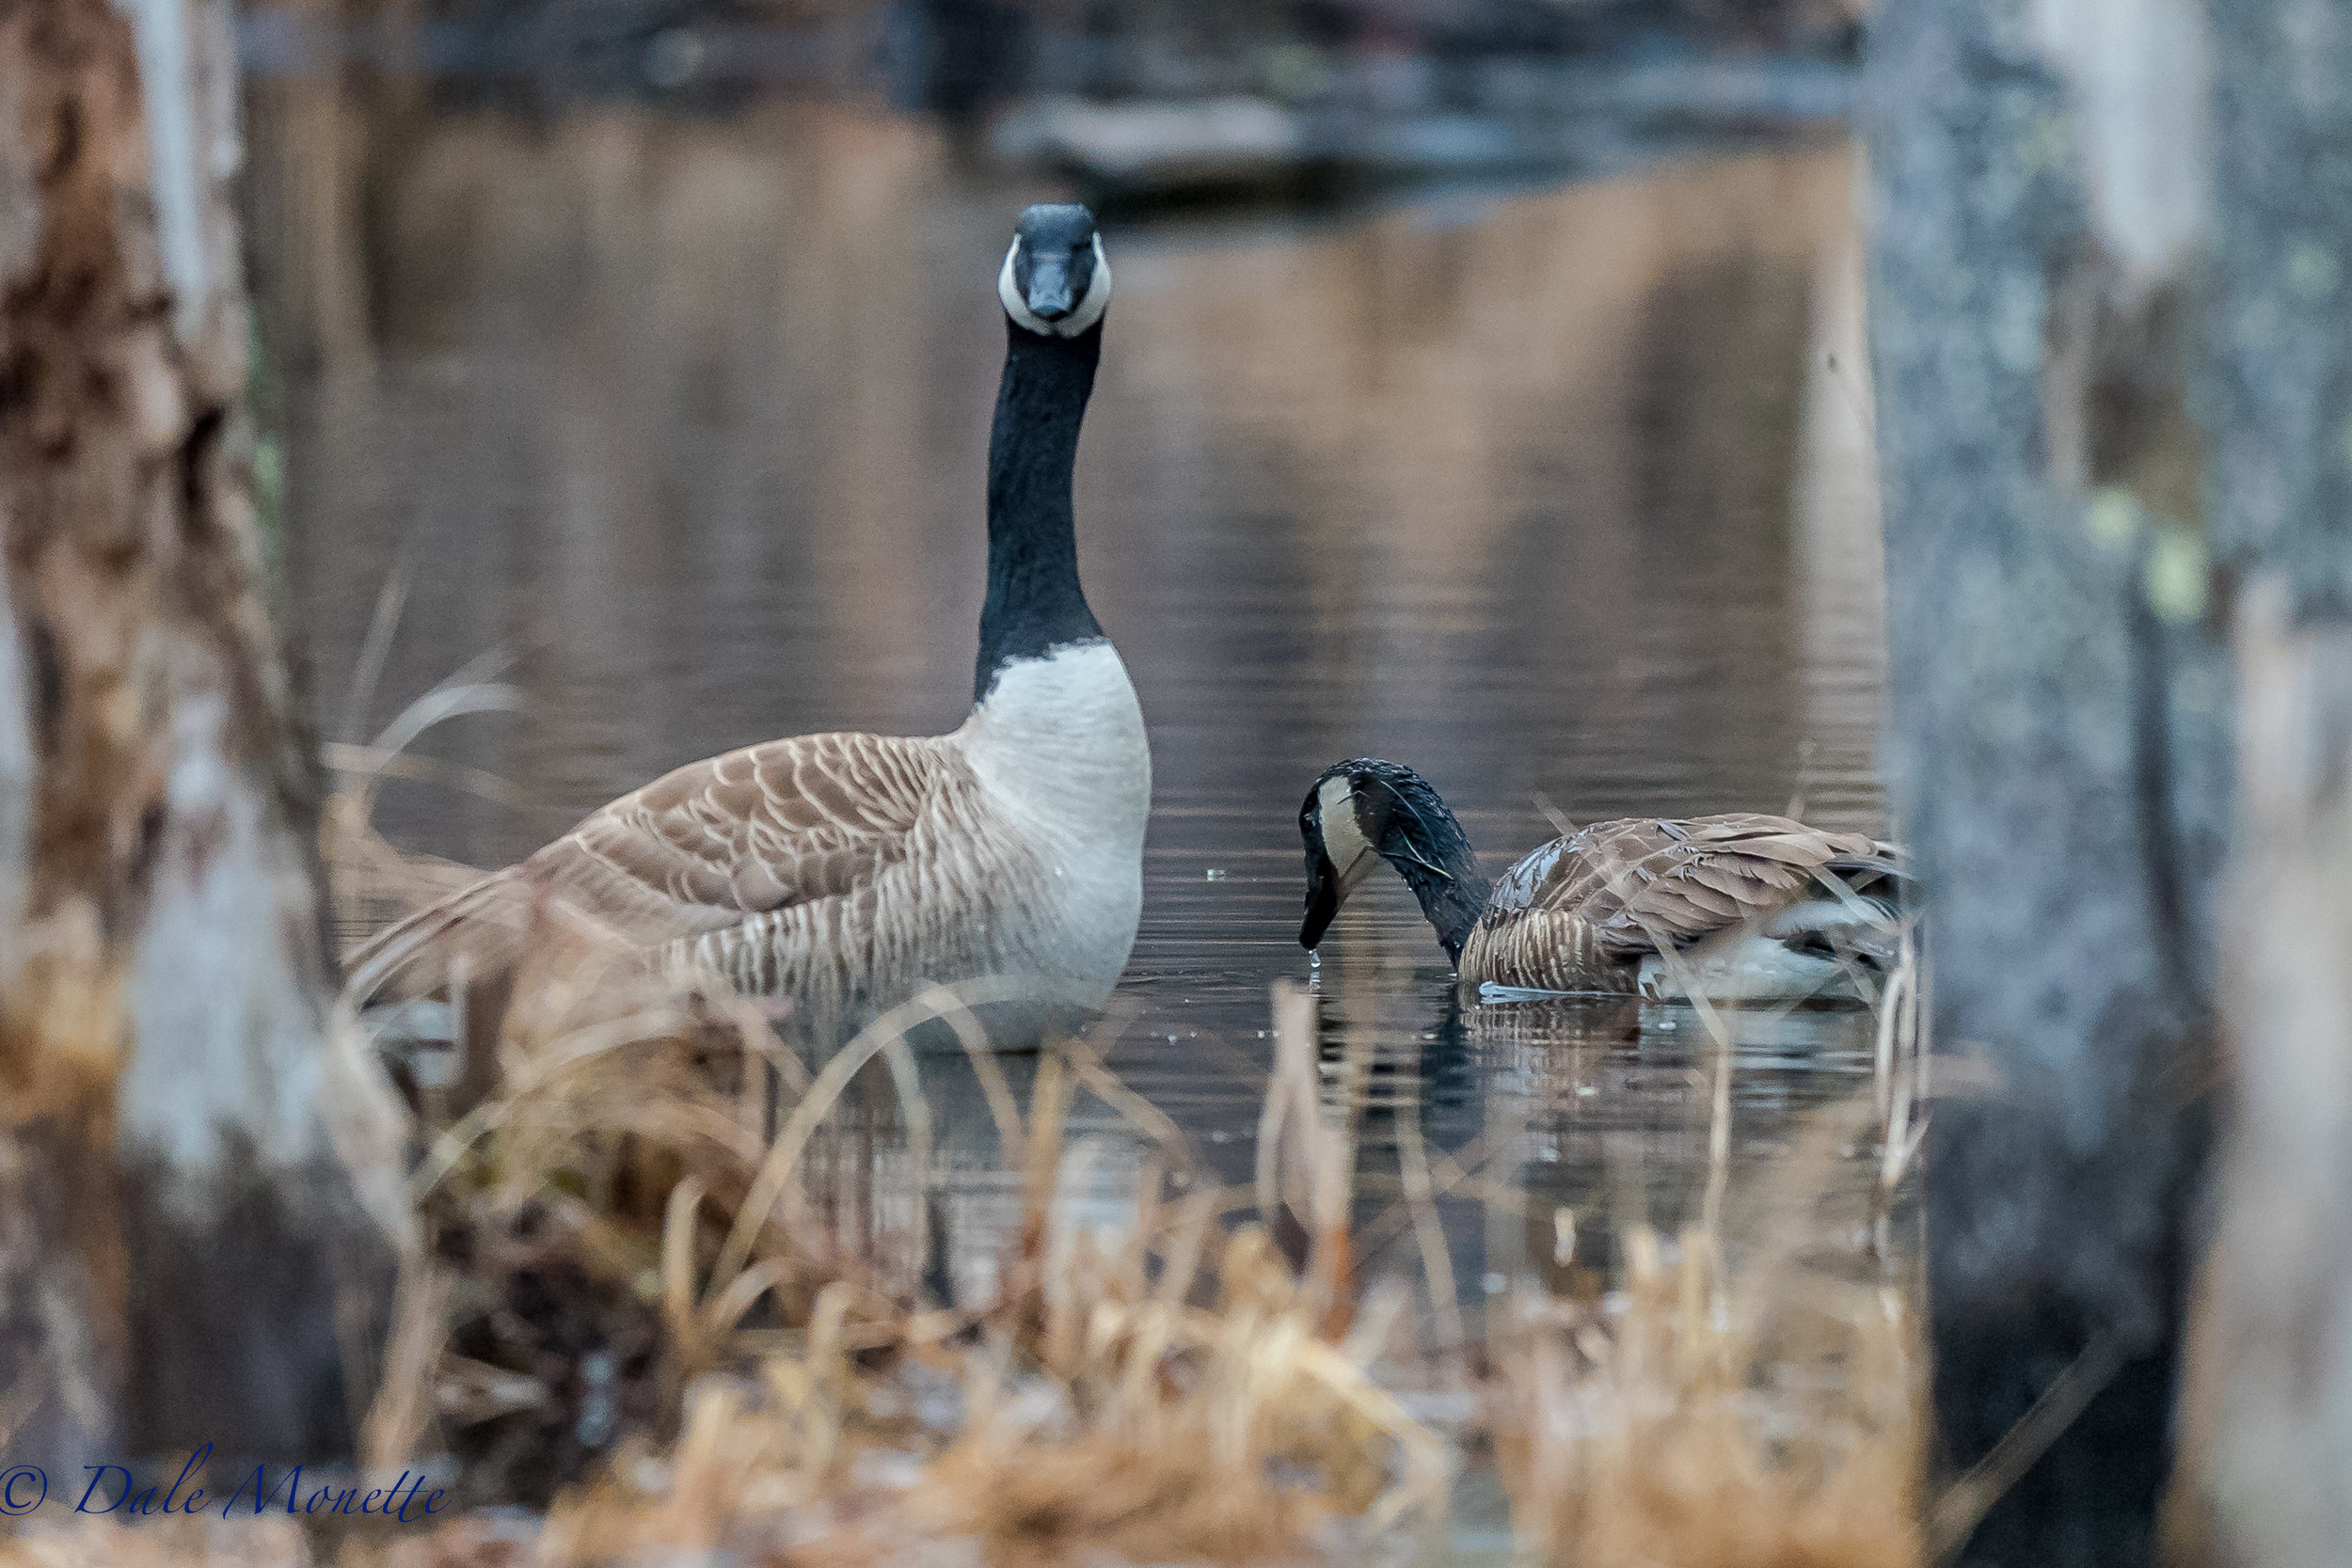   This is a greeting I received from a couple friends of mine this morning at about 7AM. These 2 geese have been nesting in the same pond for 3 years that I am aware of. This is the big male who has a band on his left leg. They always nest on one of 